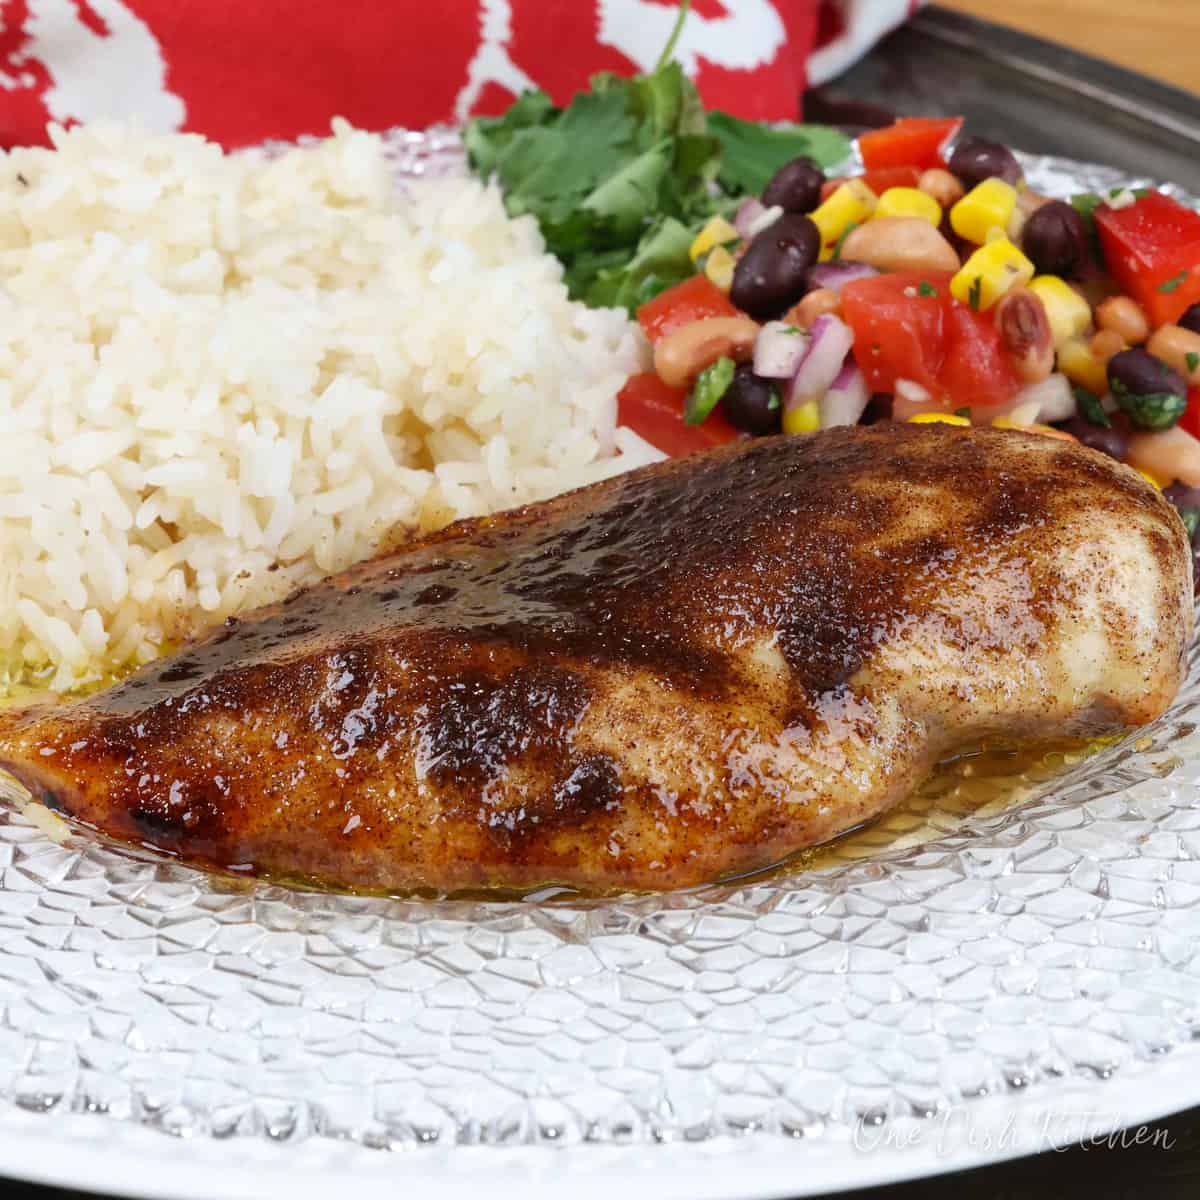 a chicken breast coated with jerk seasoning on a white plate next to a red napkin.